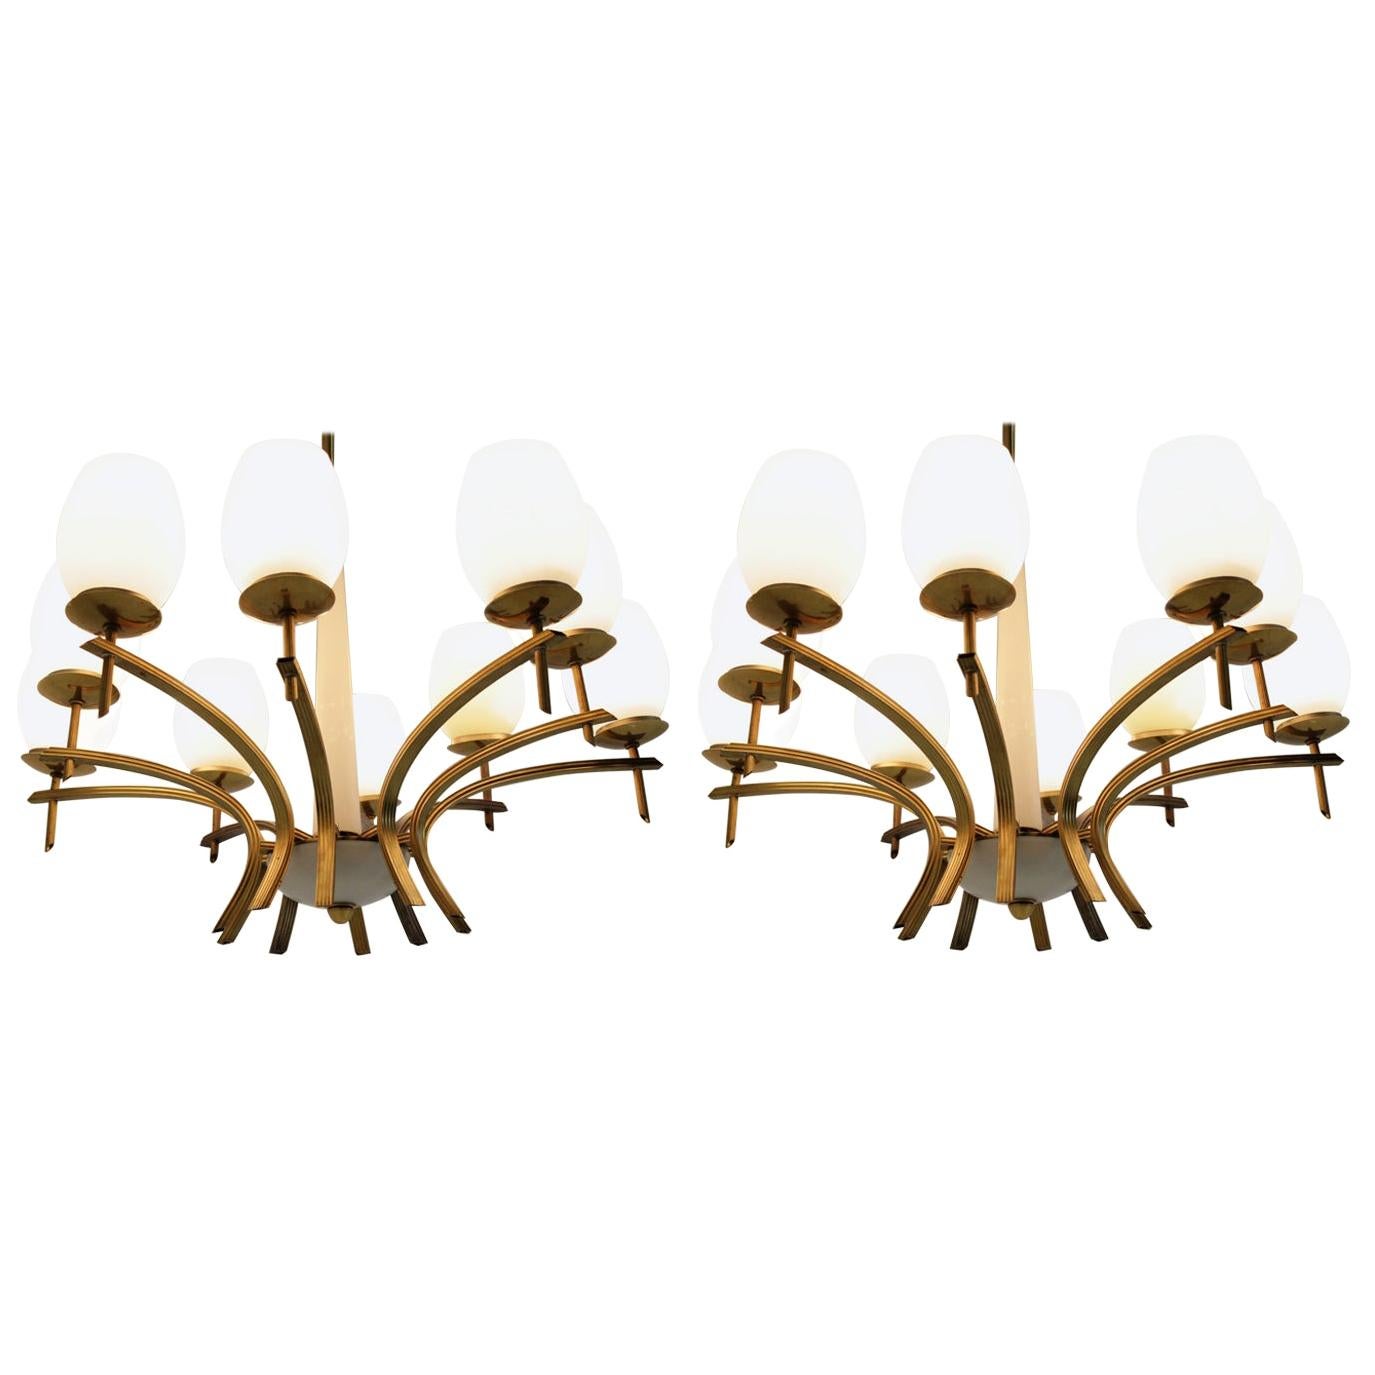 Pair of Unique Midcentury Large Brass Chandeliers, 1960